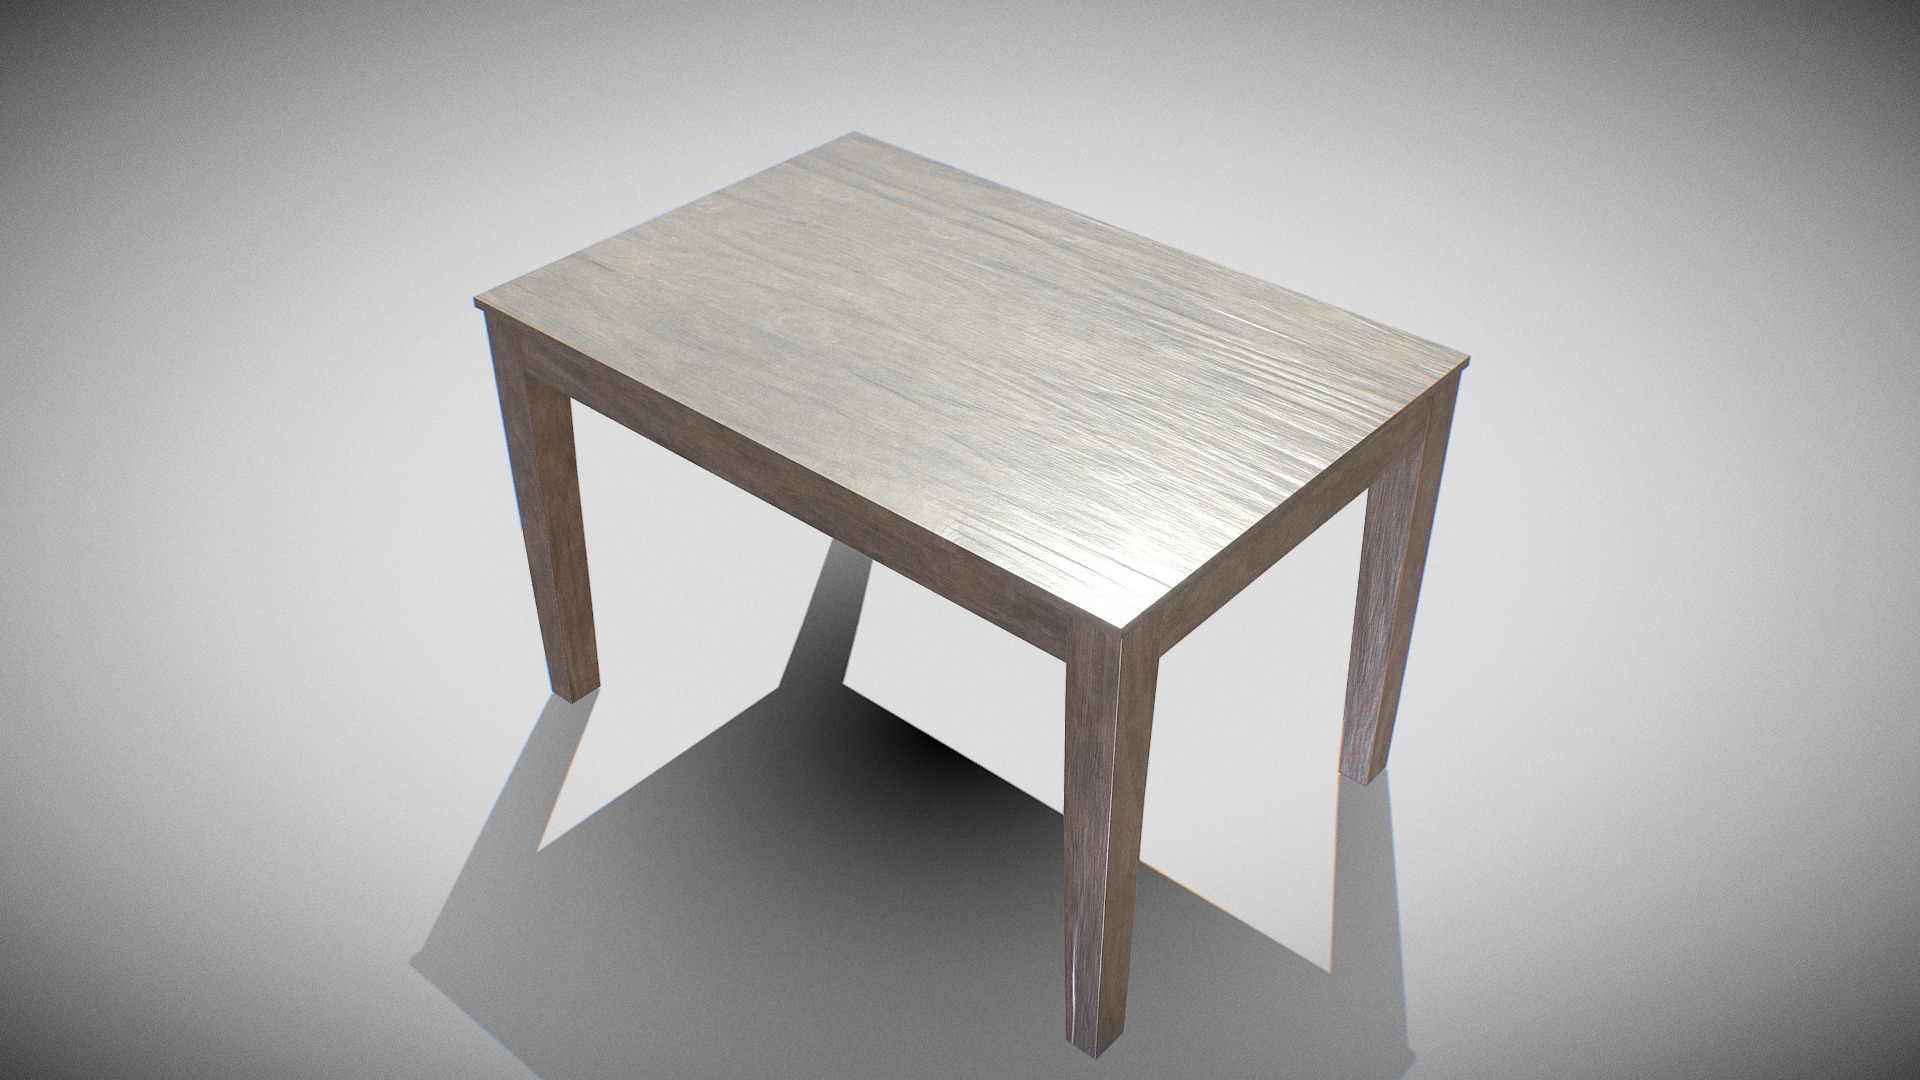 3D model Table wooden 01 - This is a 3D model of the Table wooden 01. The 3D model is about a wooden table on a white background.